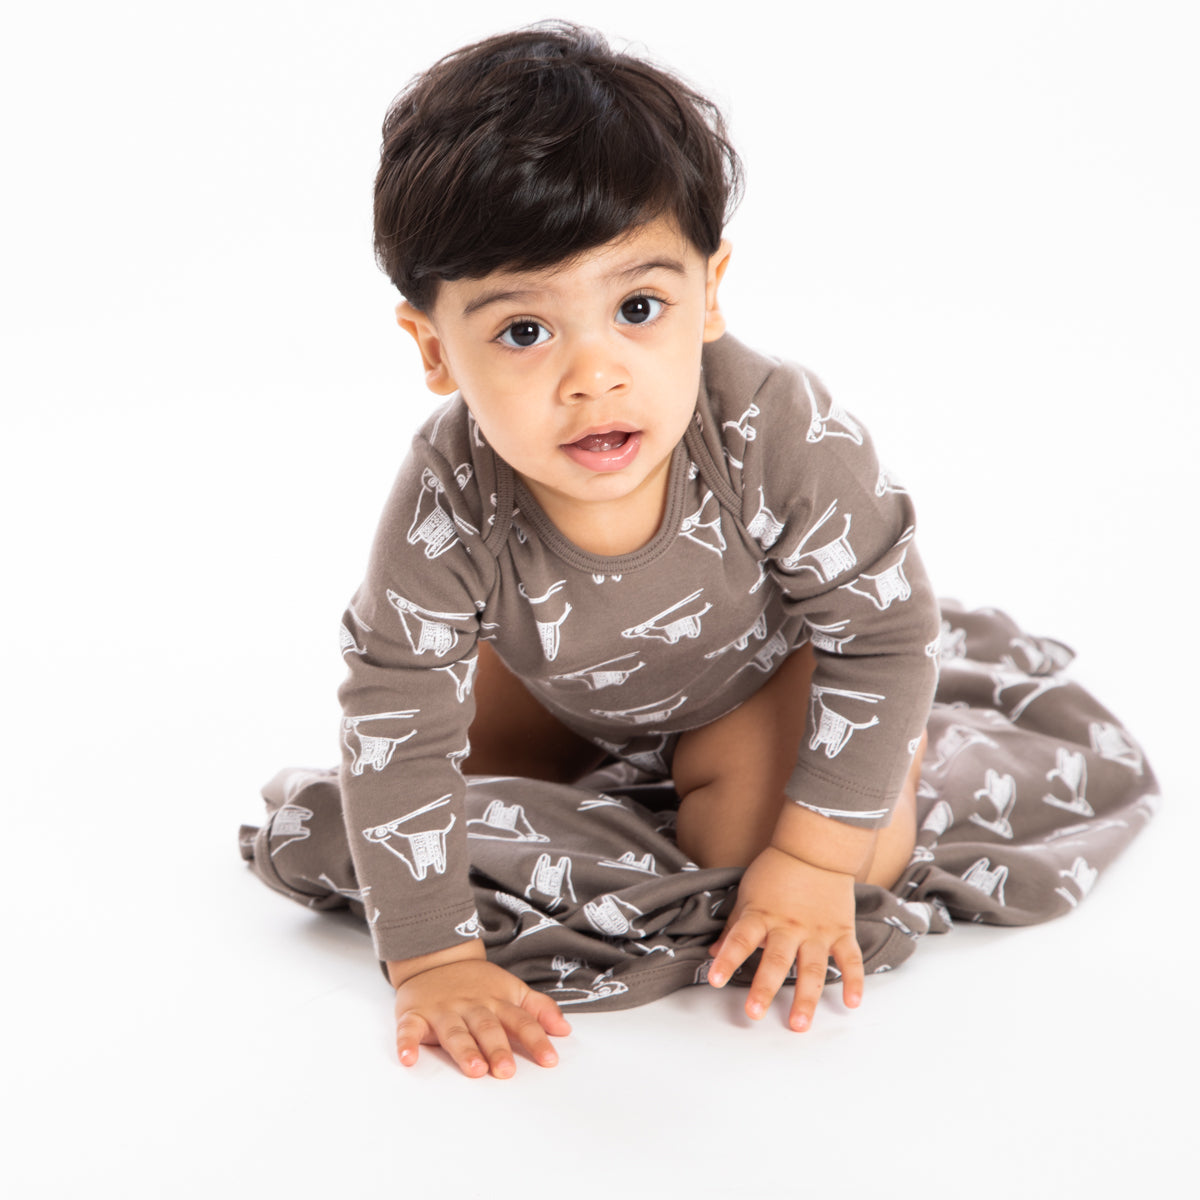 Organic 6-Piece baby set packed in a box - Baby Elephant Organic Wear